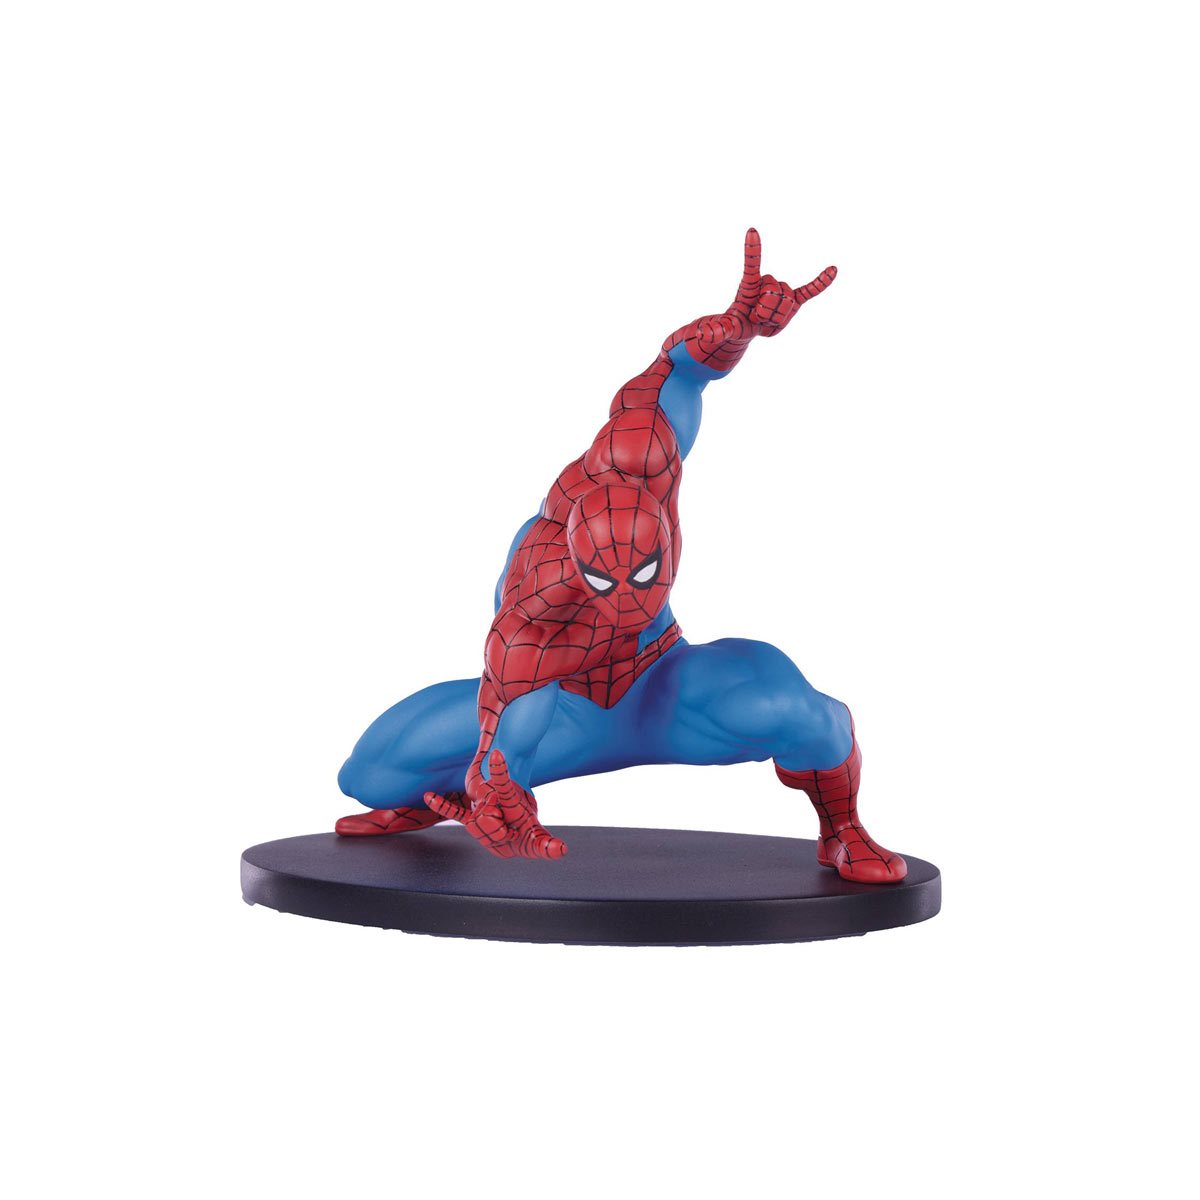 Blue & Red Marvel Spiderman Avengers Figurine: Cast Metal Collectable Statue